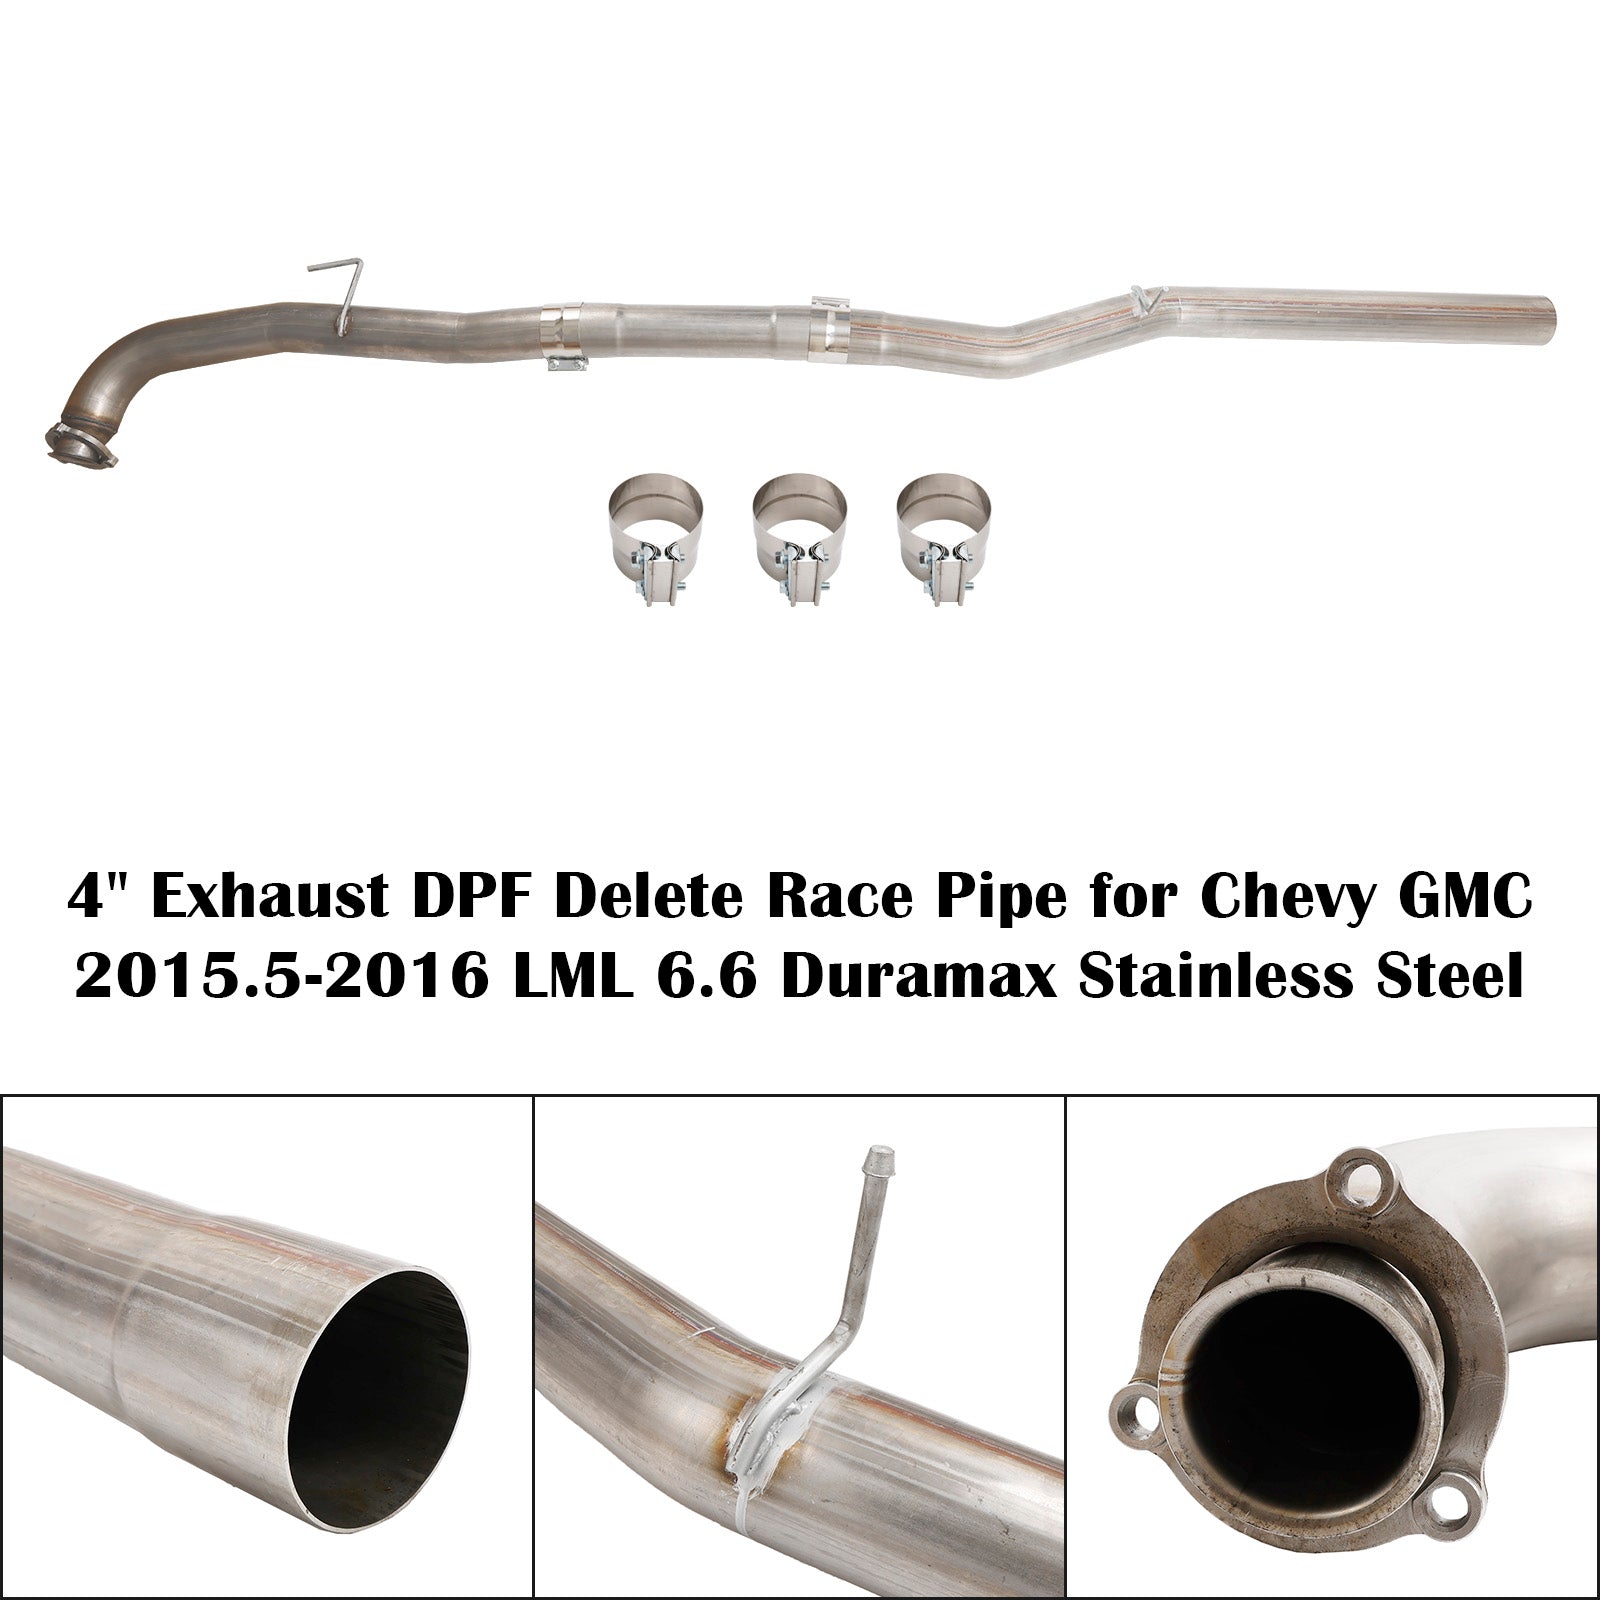 Chevy GMC 2015.5-2016 LML 6.6 Duramax Stainless Steel 4" Exhaust DPF Delete Race Pipe - 0